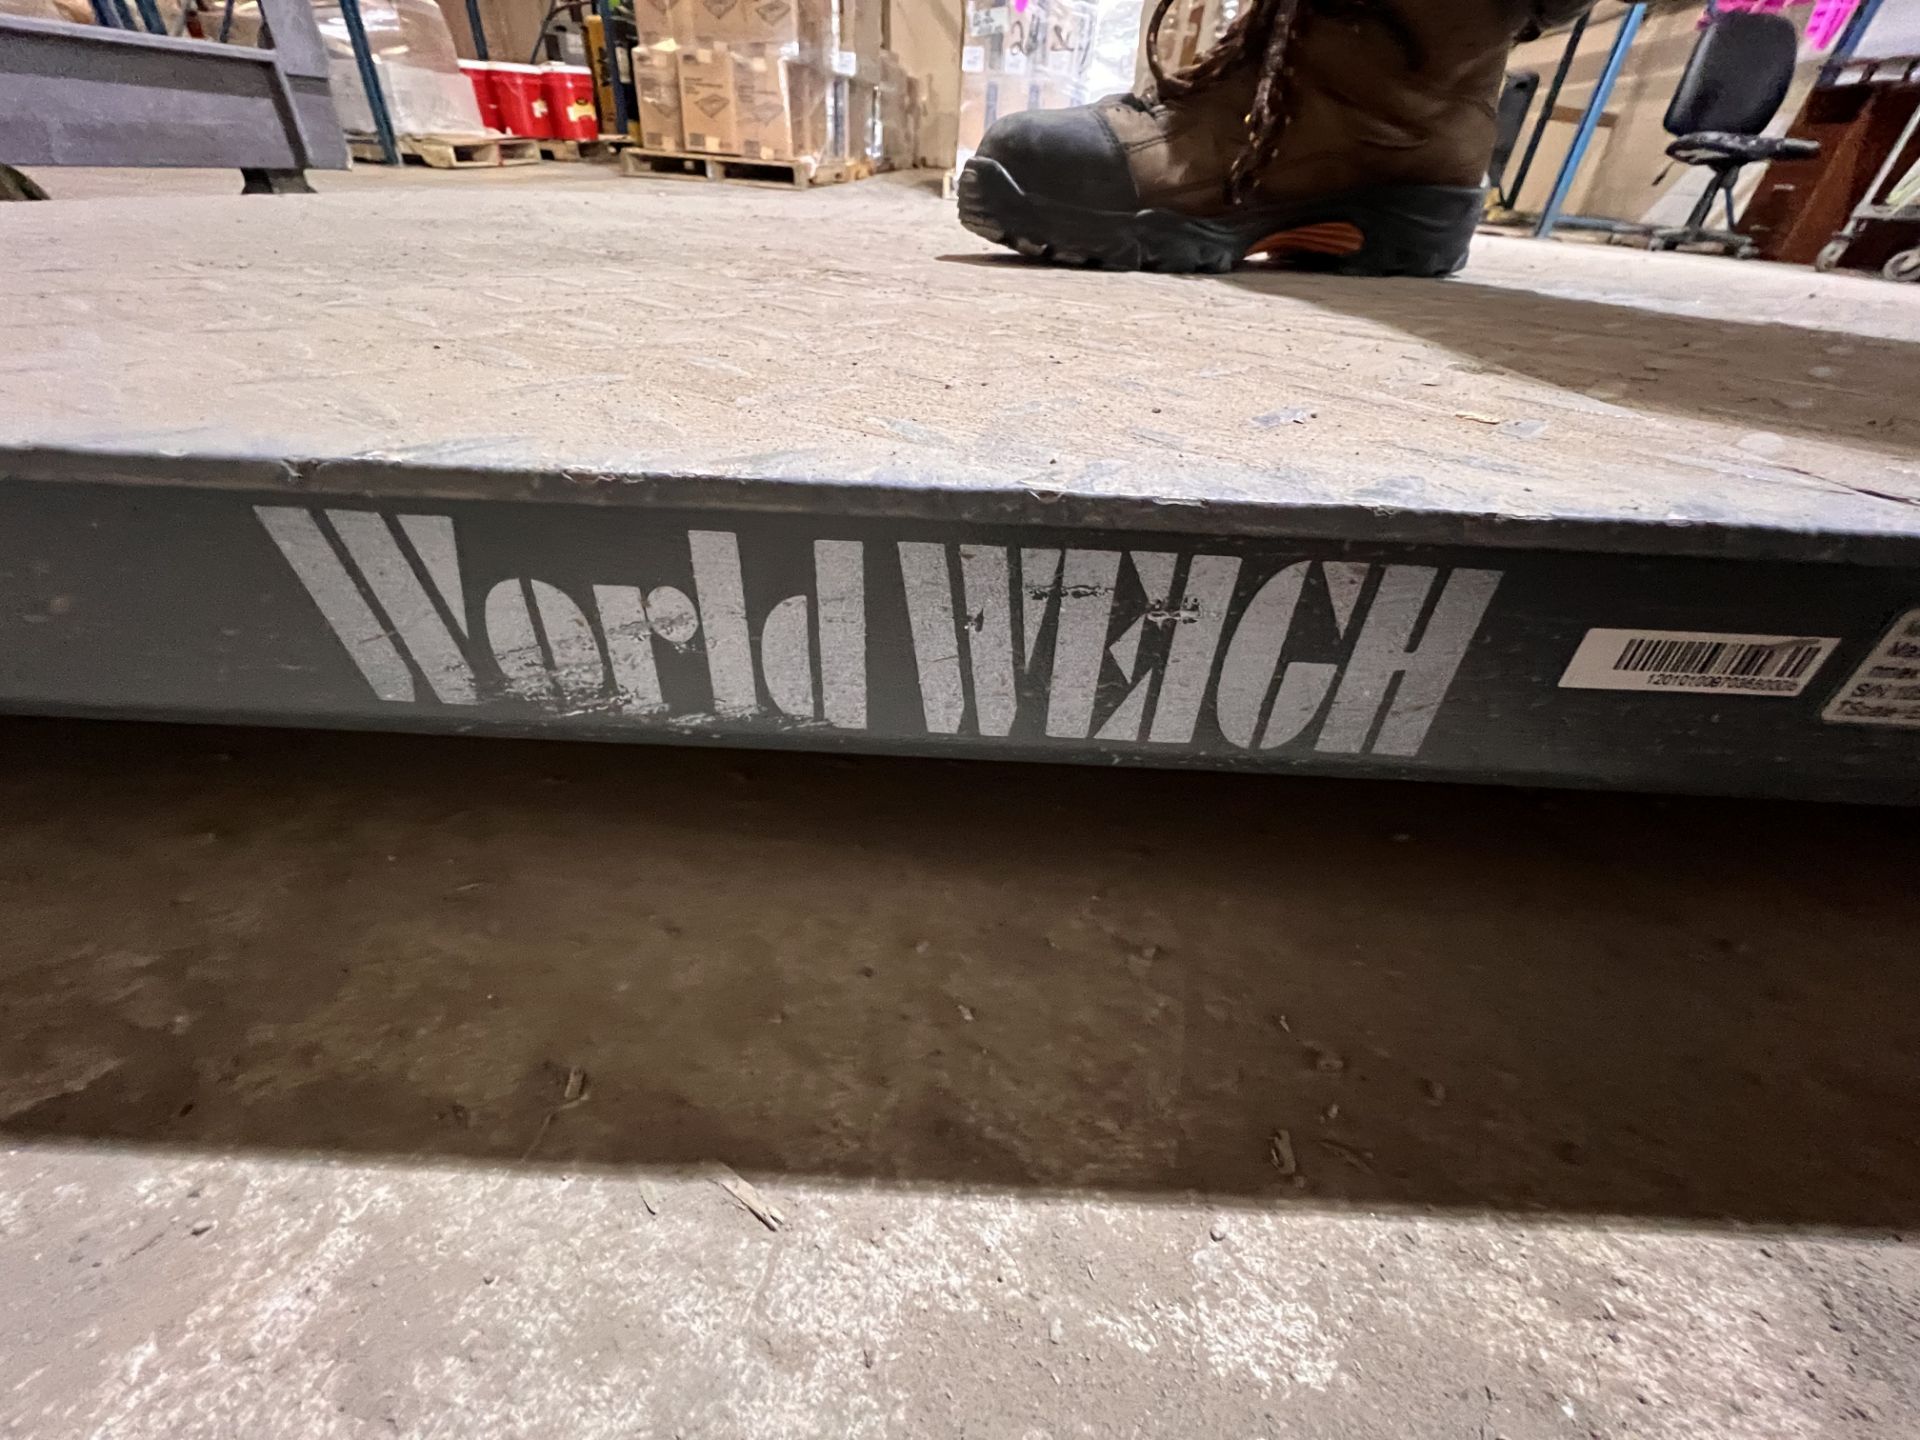 WORLD WEIGH PALLET SCALE WITH DIGITAL READOUT, MODEL TR1212, S/N 105110097036, 5,000 LB - Image 4 of 8